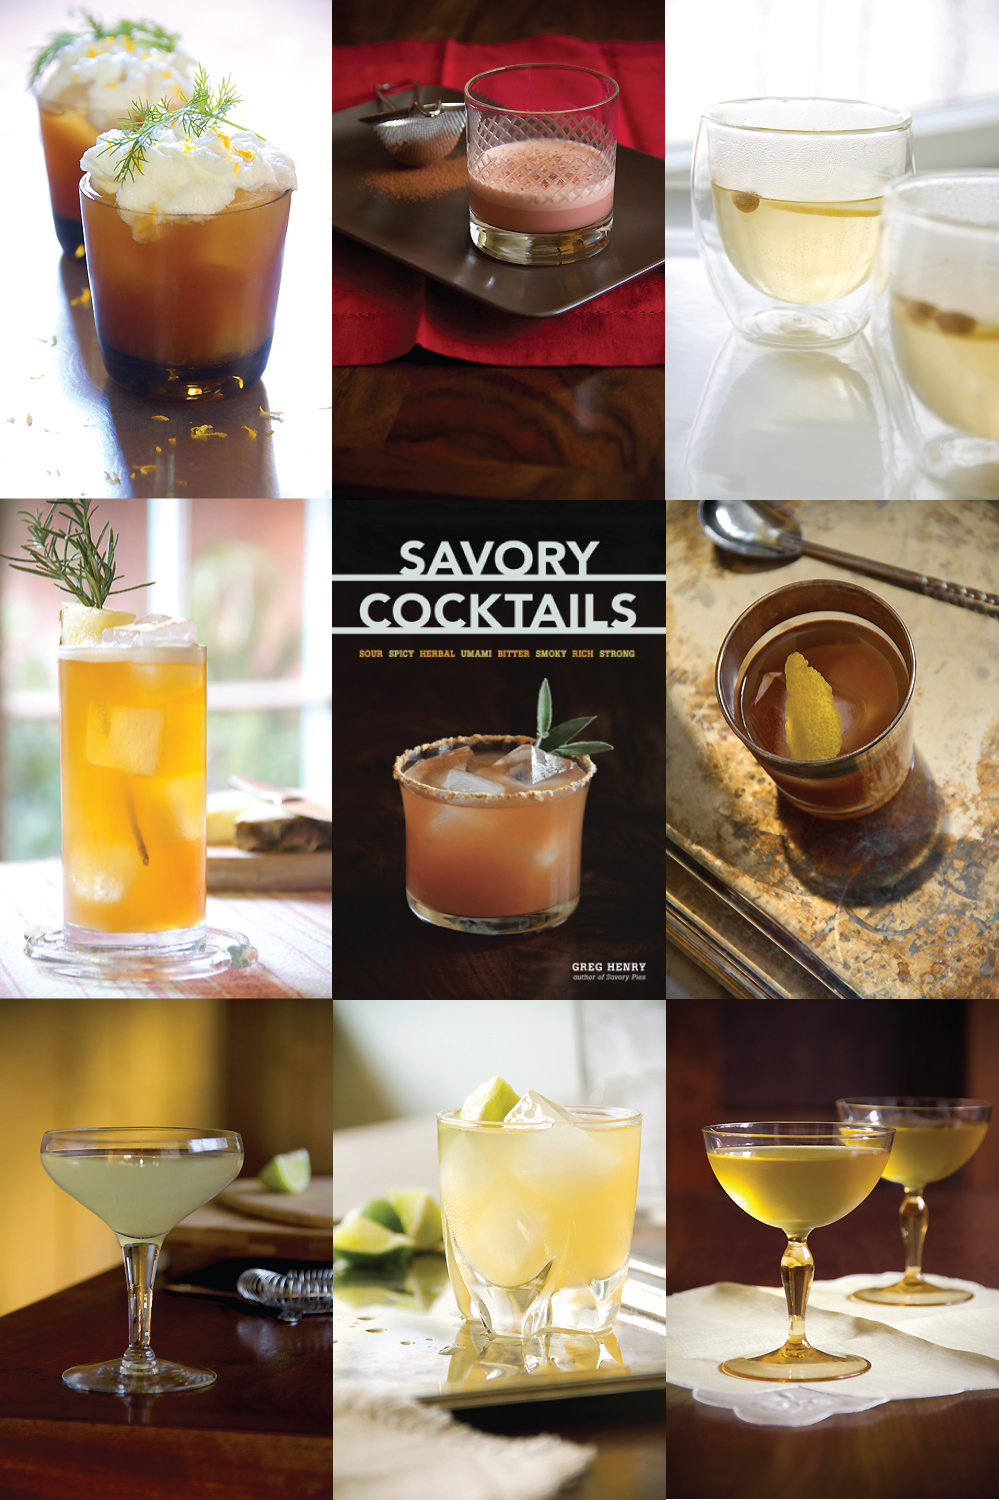 Savory Cocktails from Greg Henry